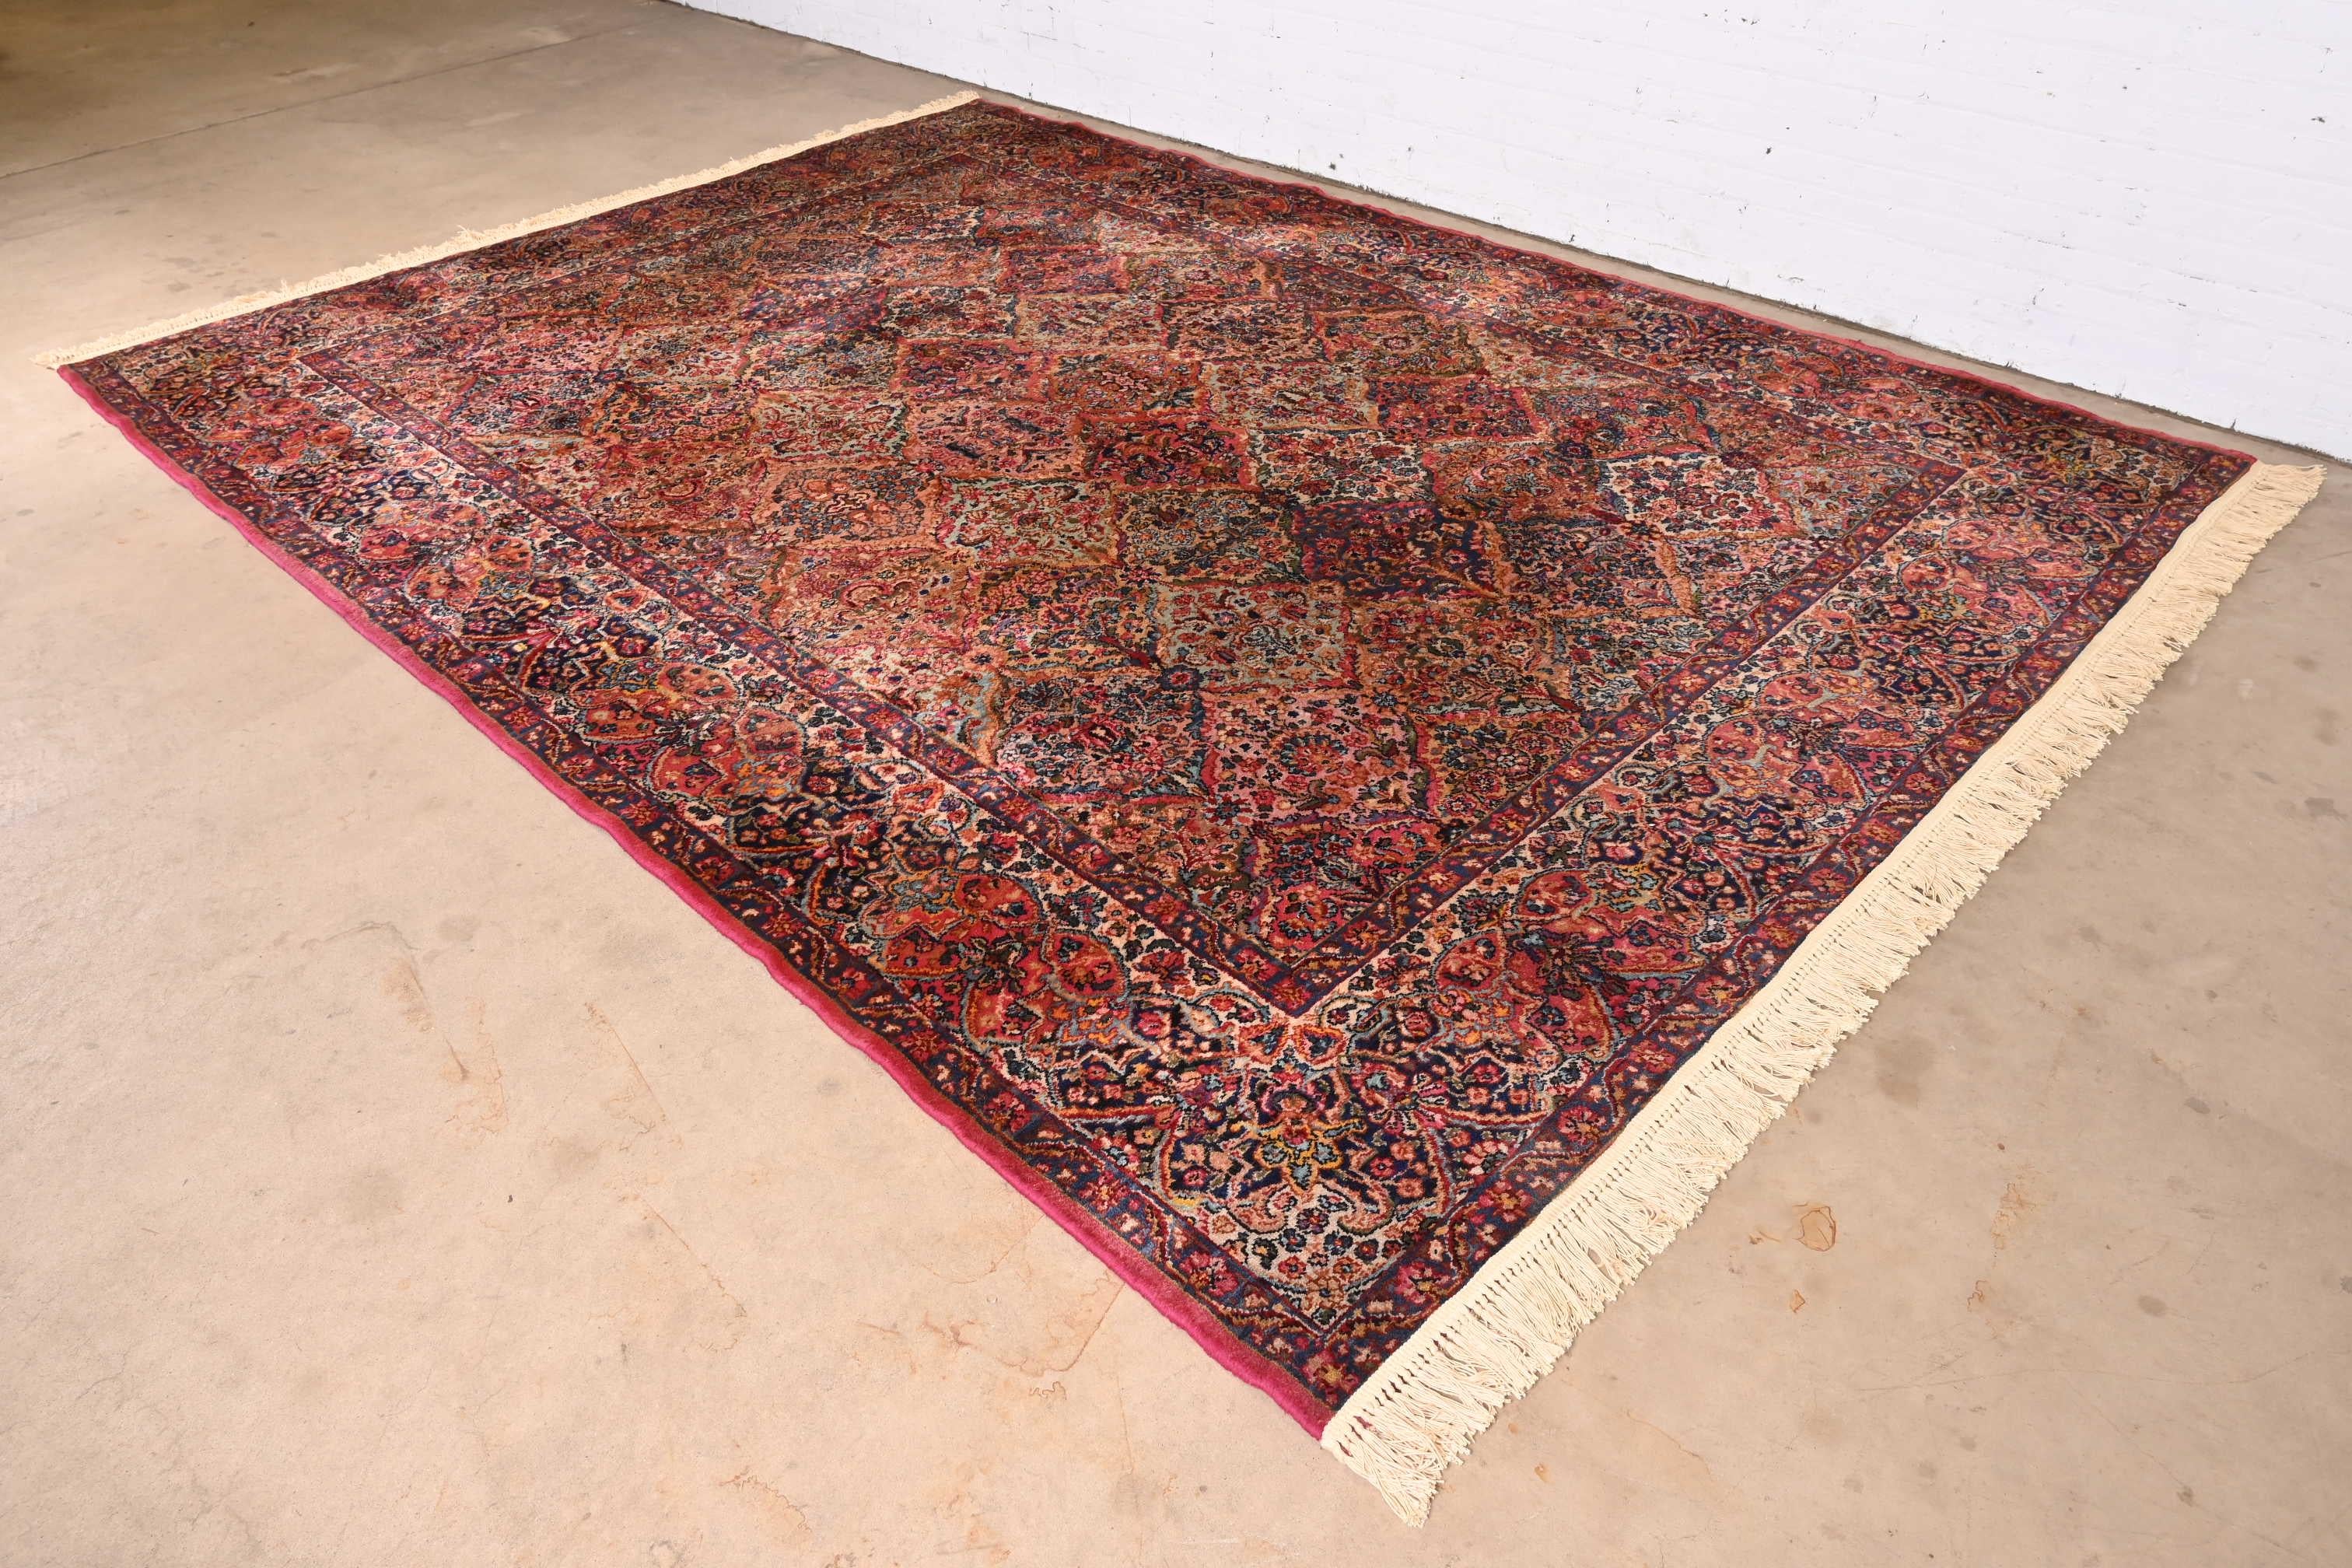 An exceptional Persian Kirman style room size rug

By Karastan

USA, Circa 1940s

Features a beautiful all-over patchwork pattern containing myriad flowers woven in myriad colors across the field, and surrounded by a border of similar pattern